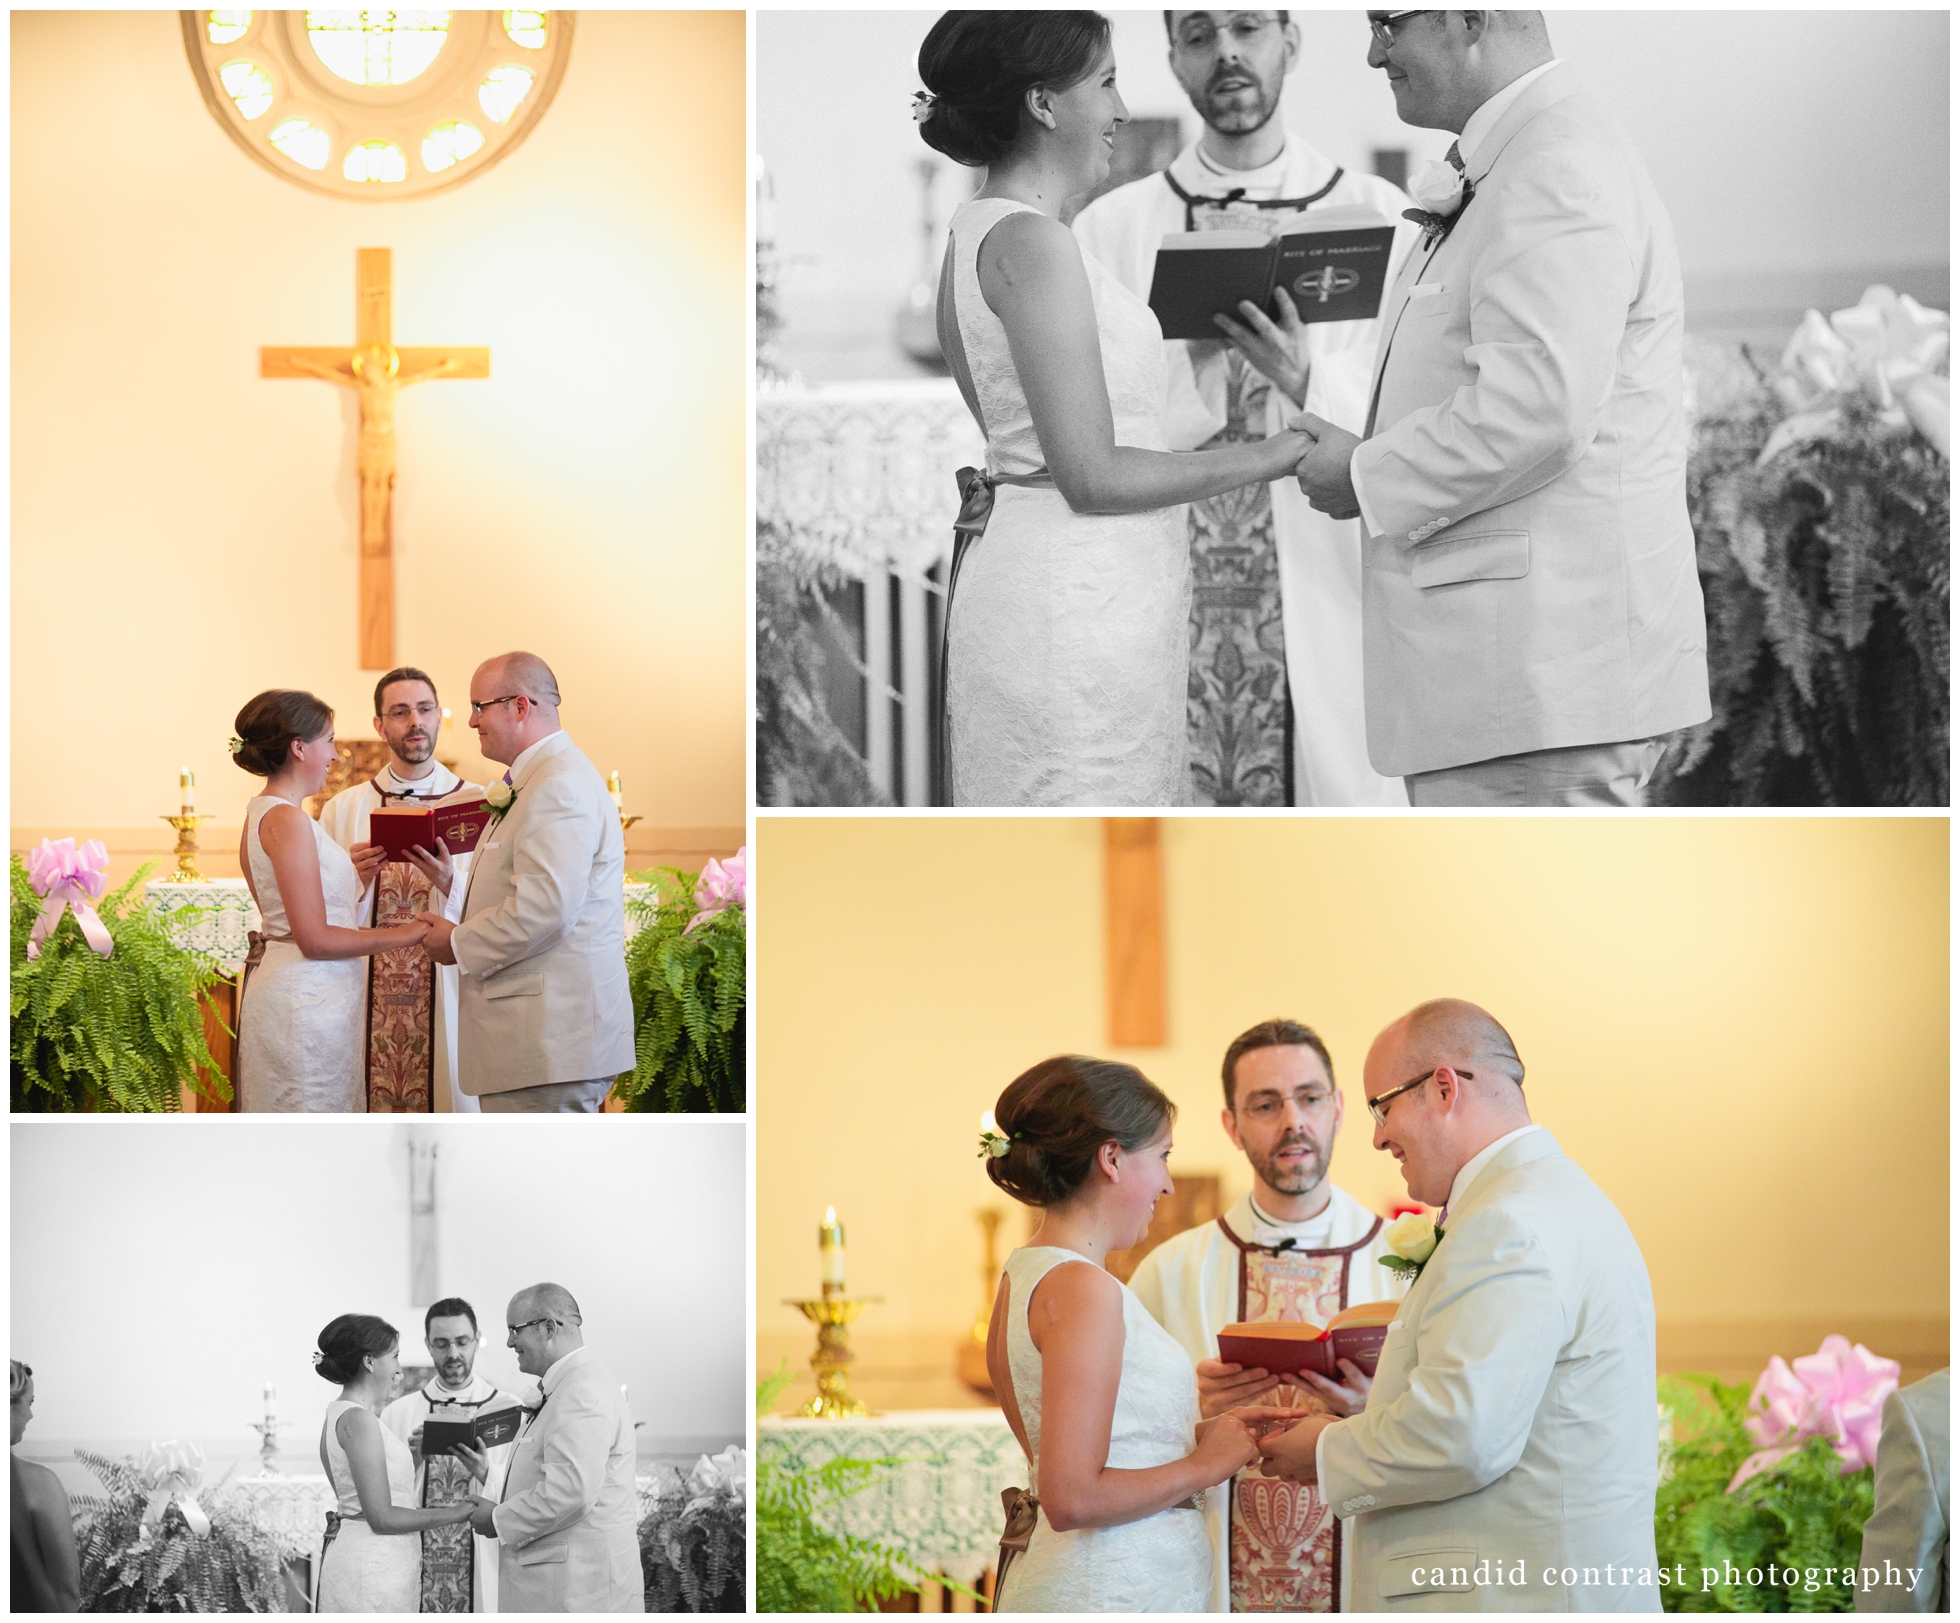 dubuque wedding at st joes in key west, candid contrast photography